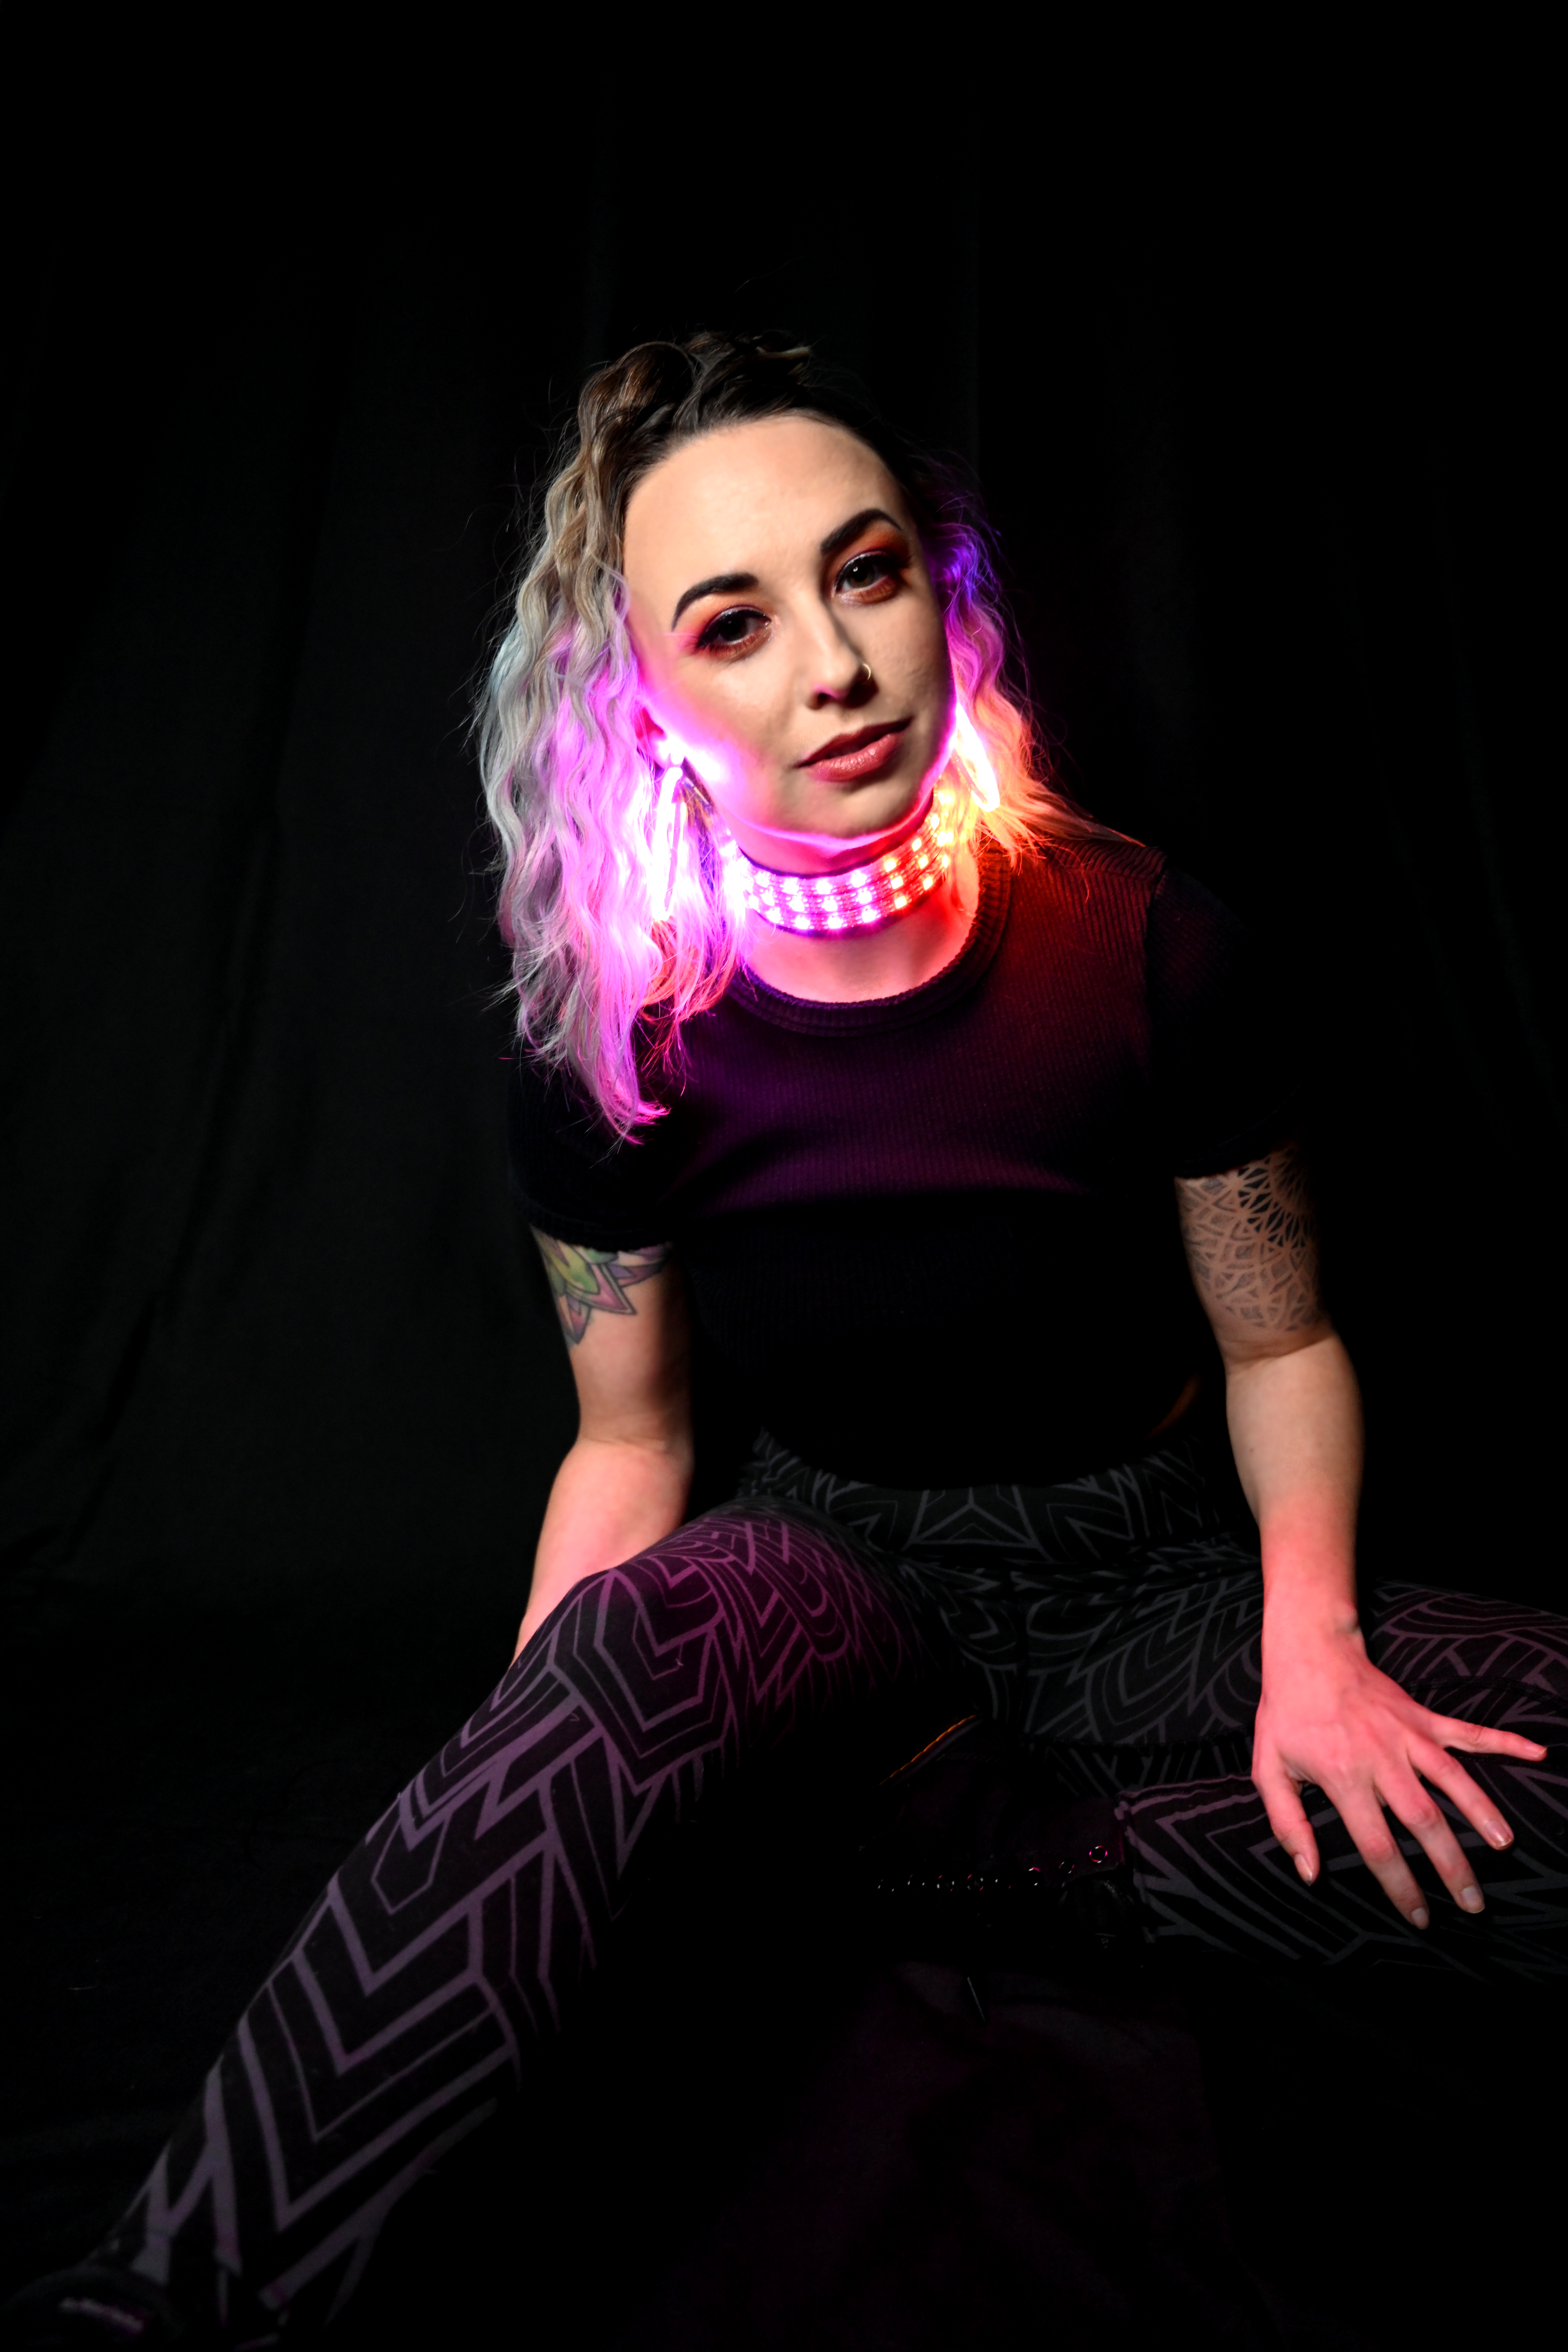 model in a sitting pose wearing led choker and led earrings w/ black background